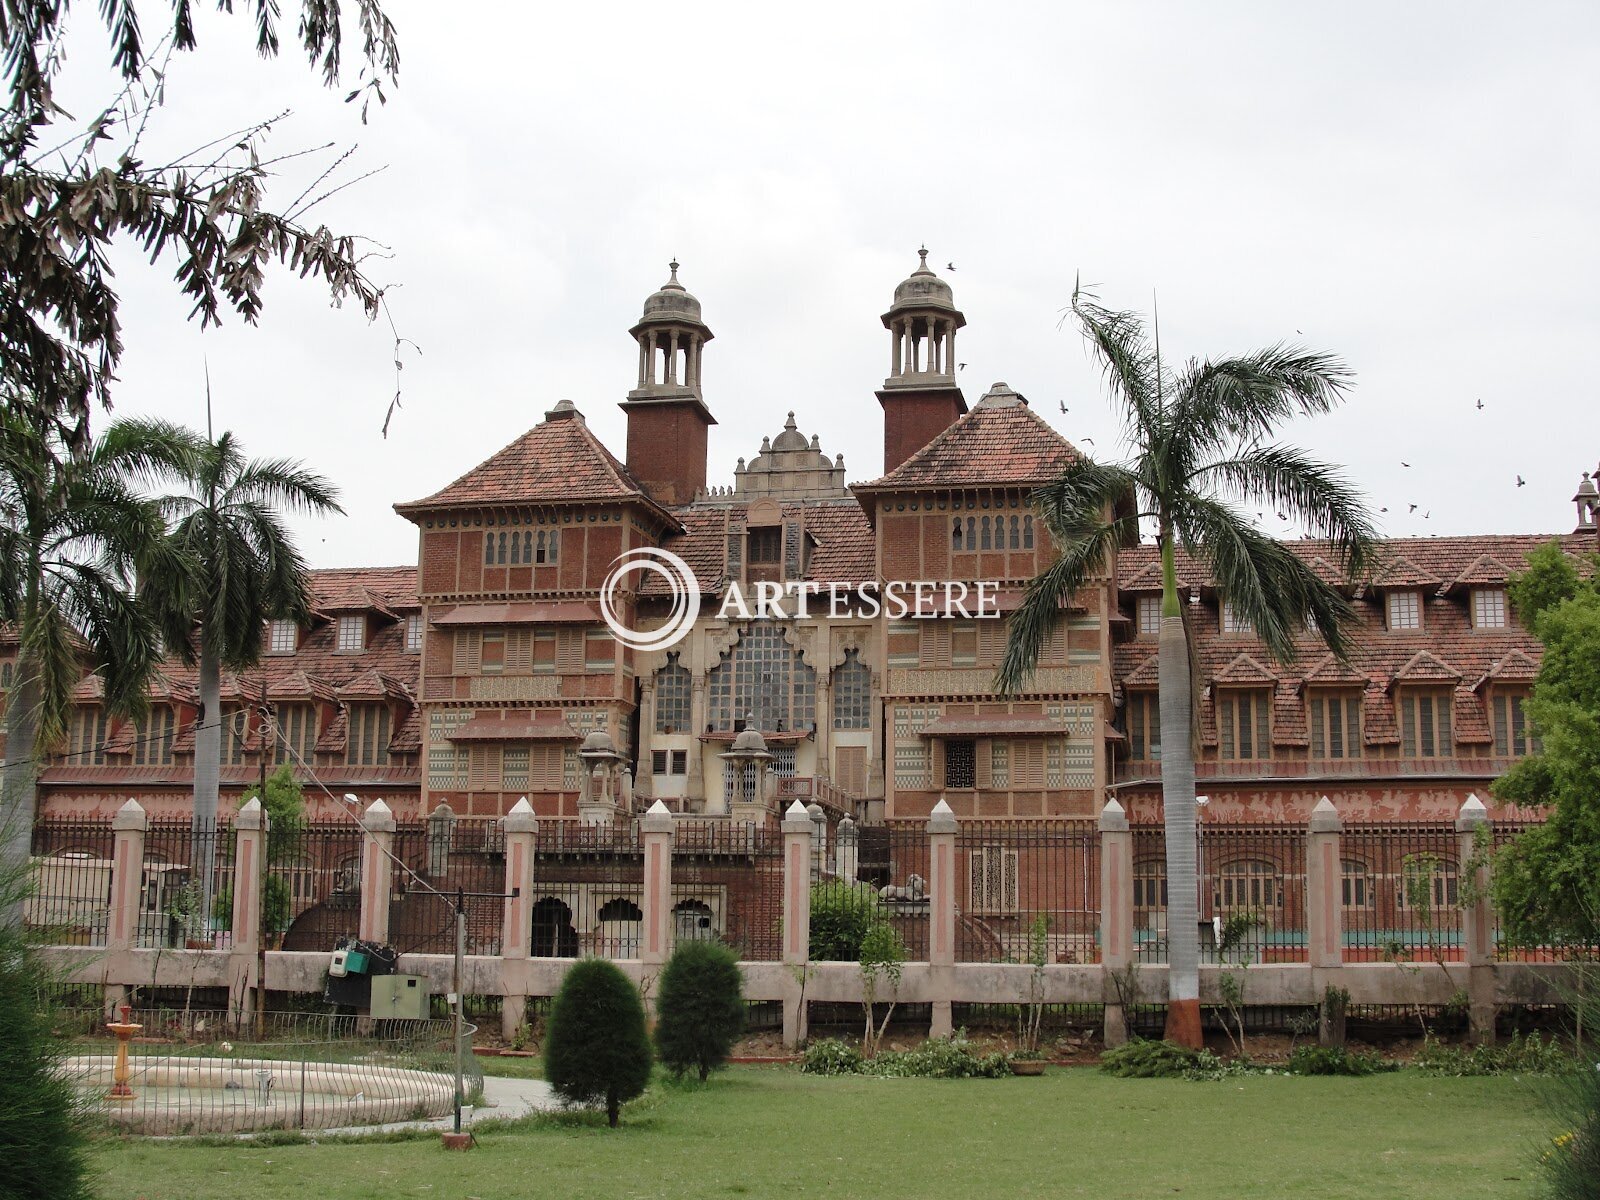 Baroda Museum And Picture Gallery